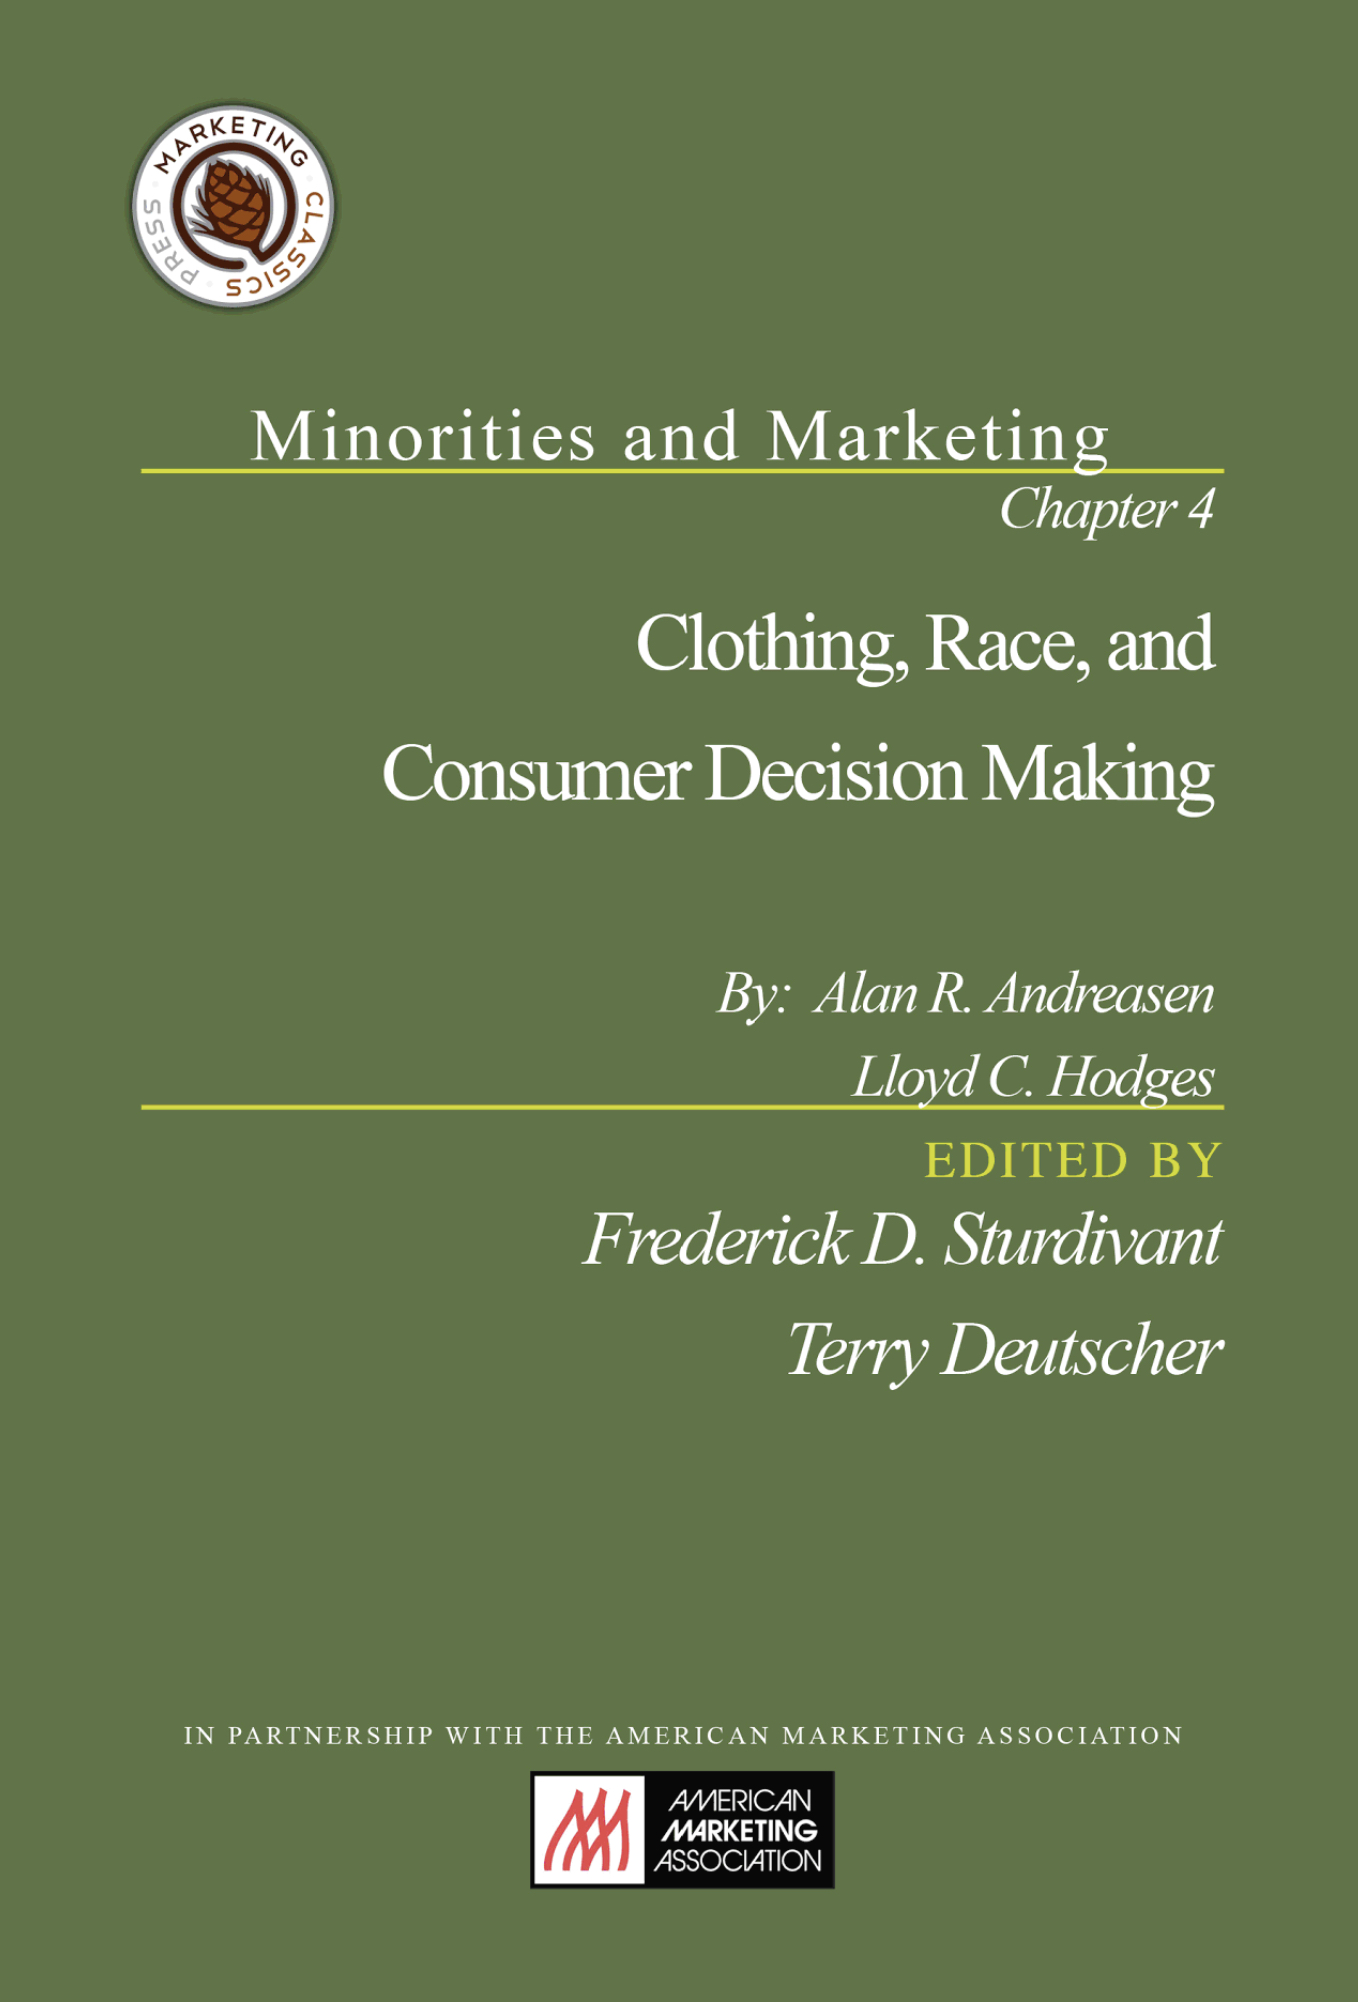 Clothing, Race, and Consumer Decision Making